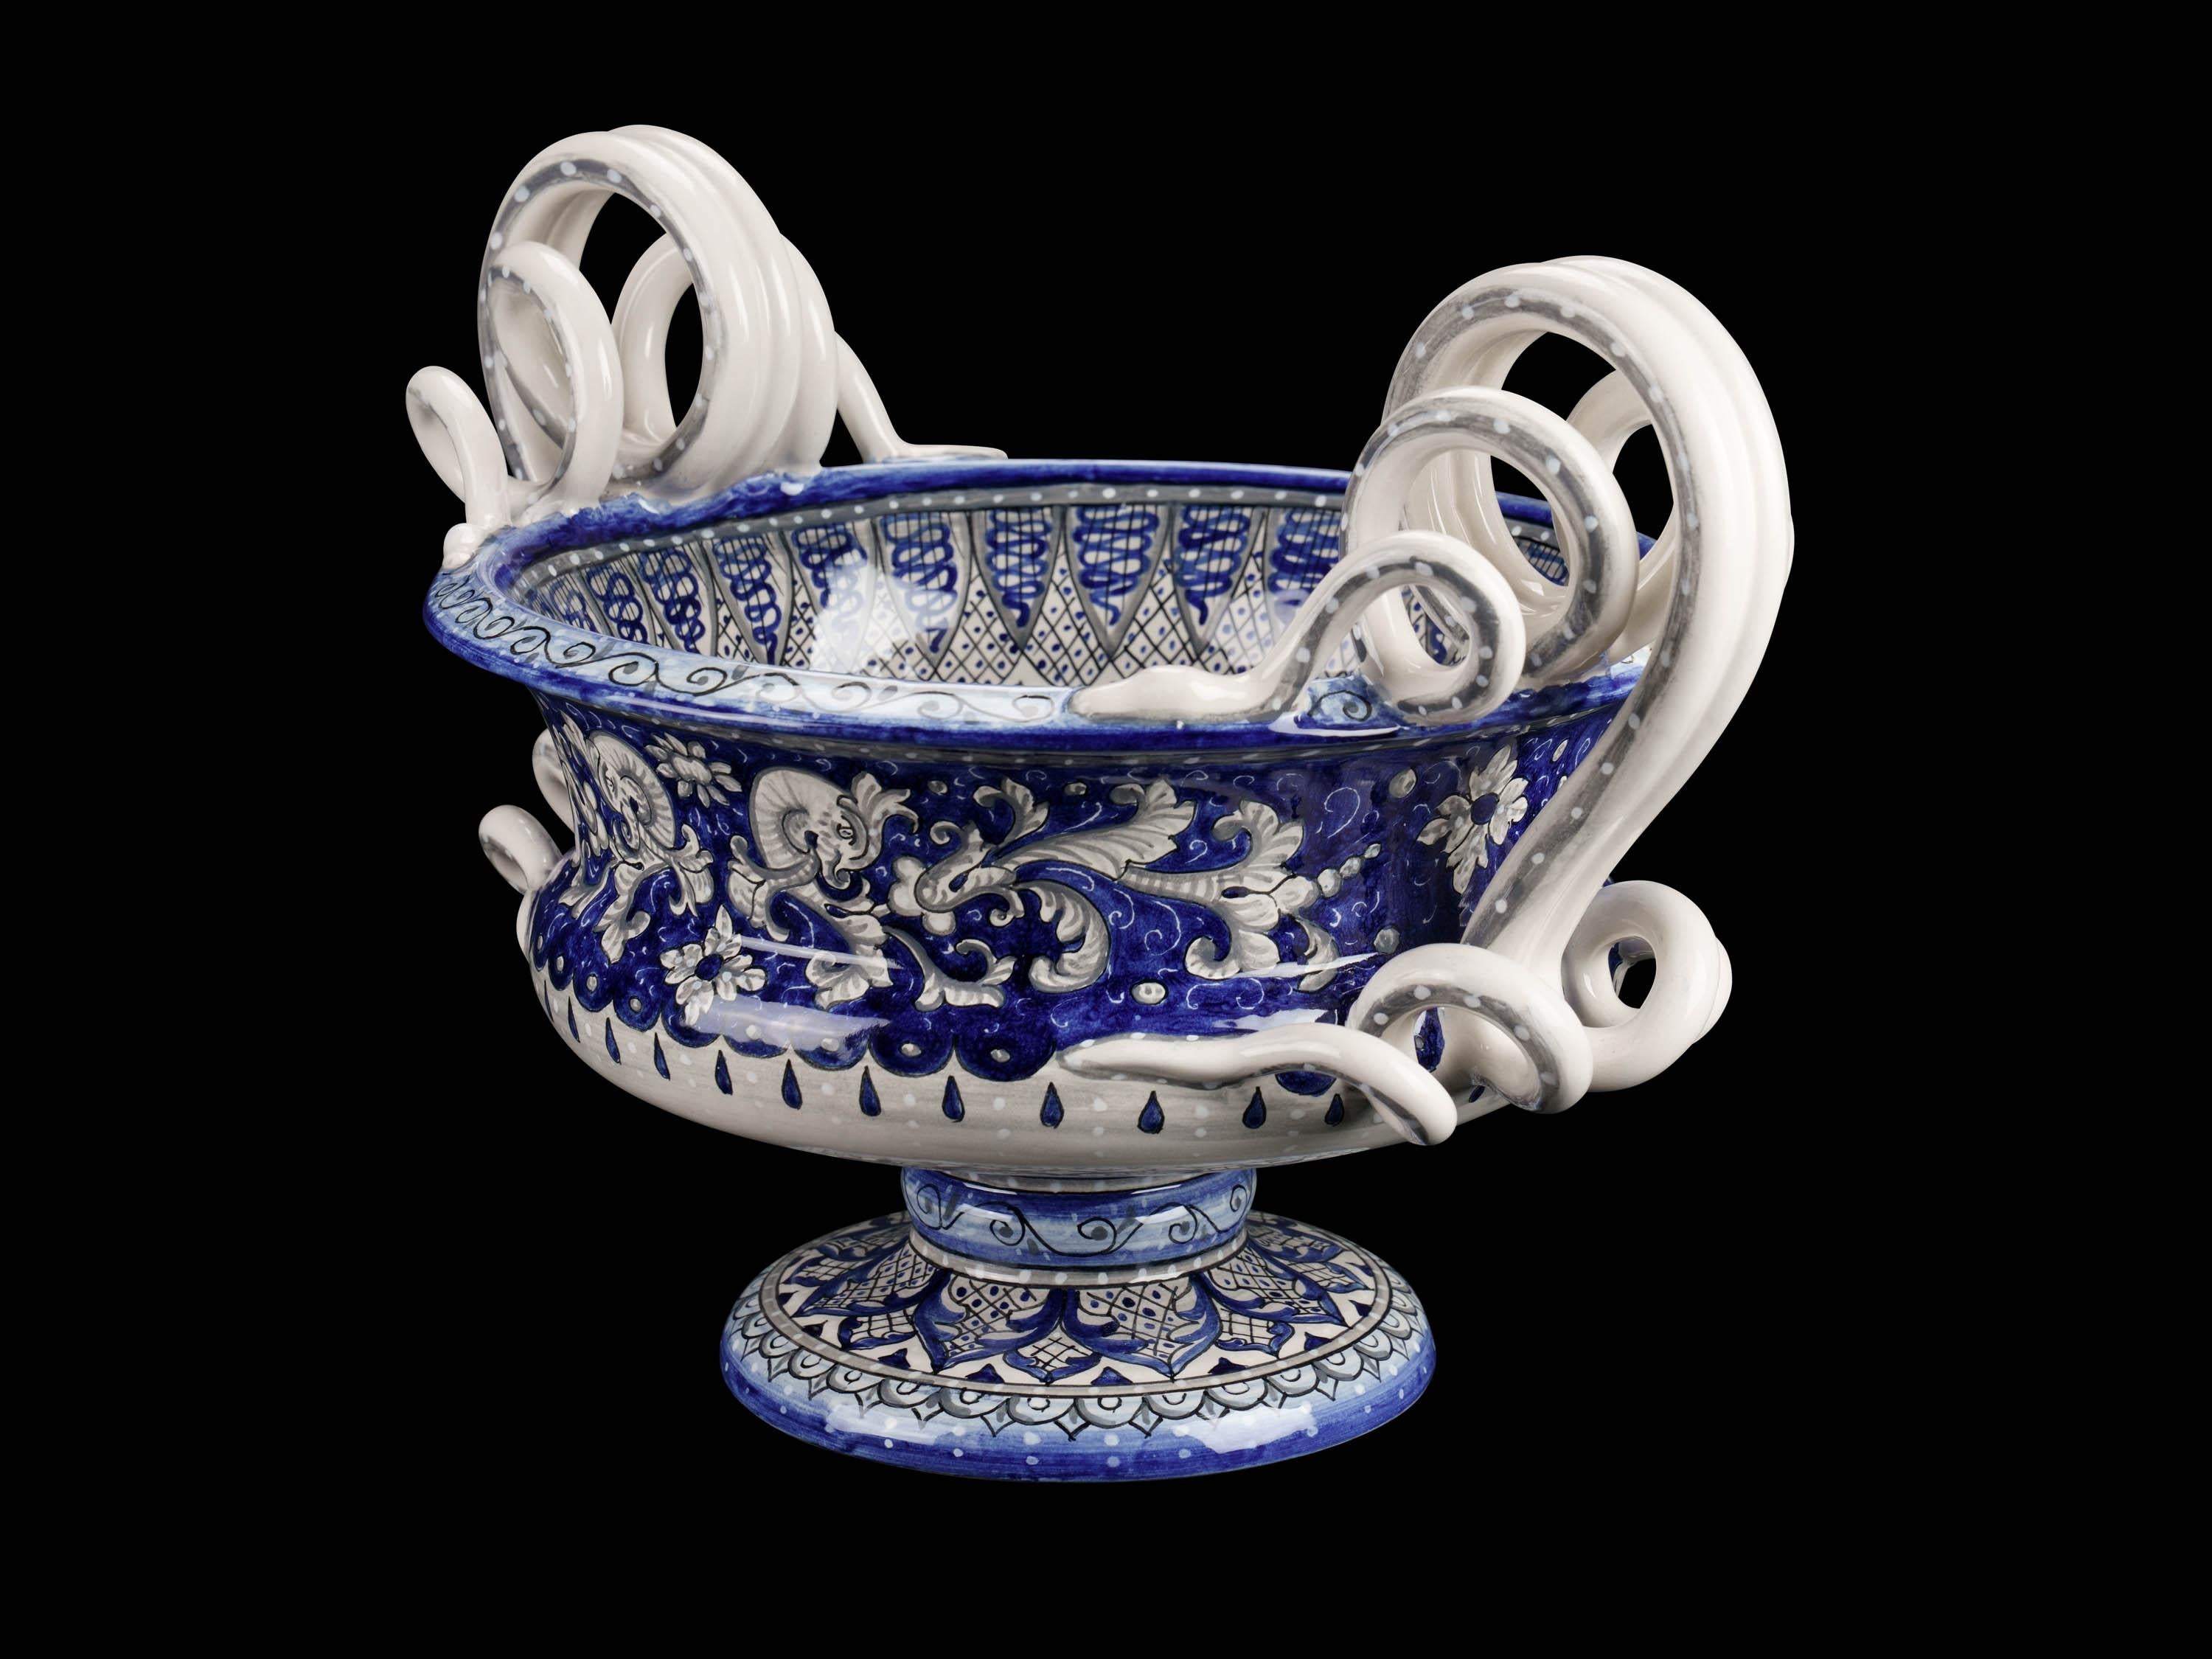 Tableware Set Ceramic, Serving Centerpiece Bowl, Charger Plates, Blue Majolica  In New Condition For Sale In Recanati, IT